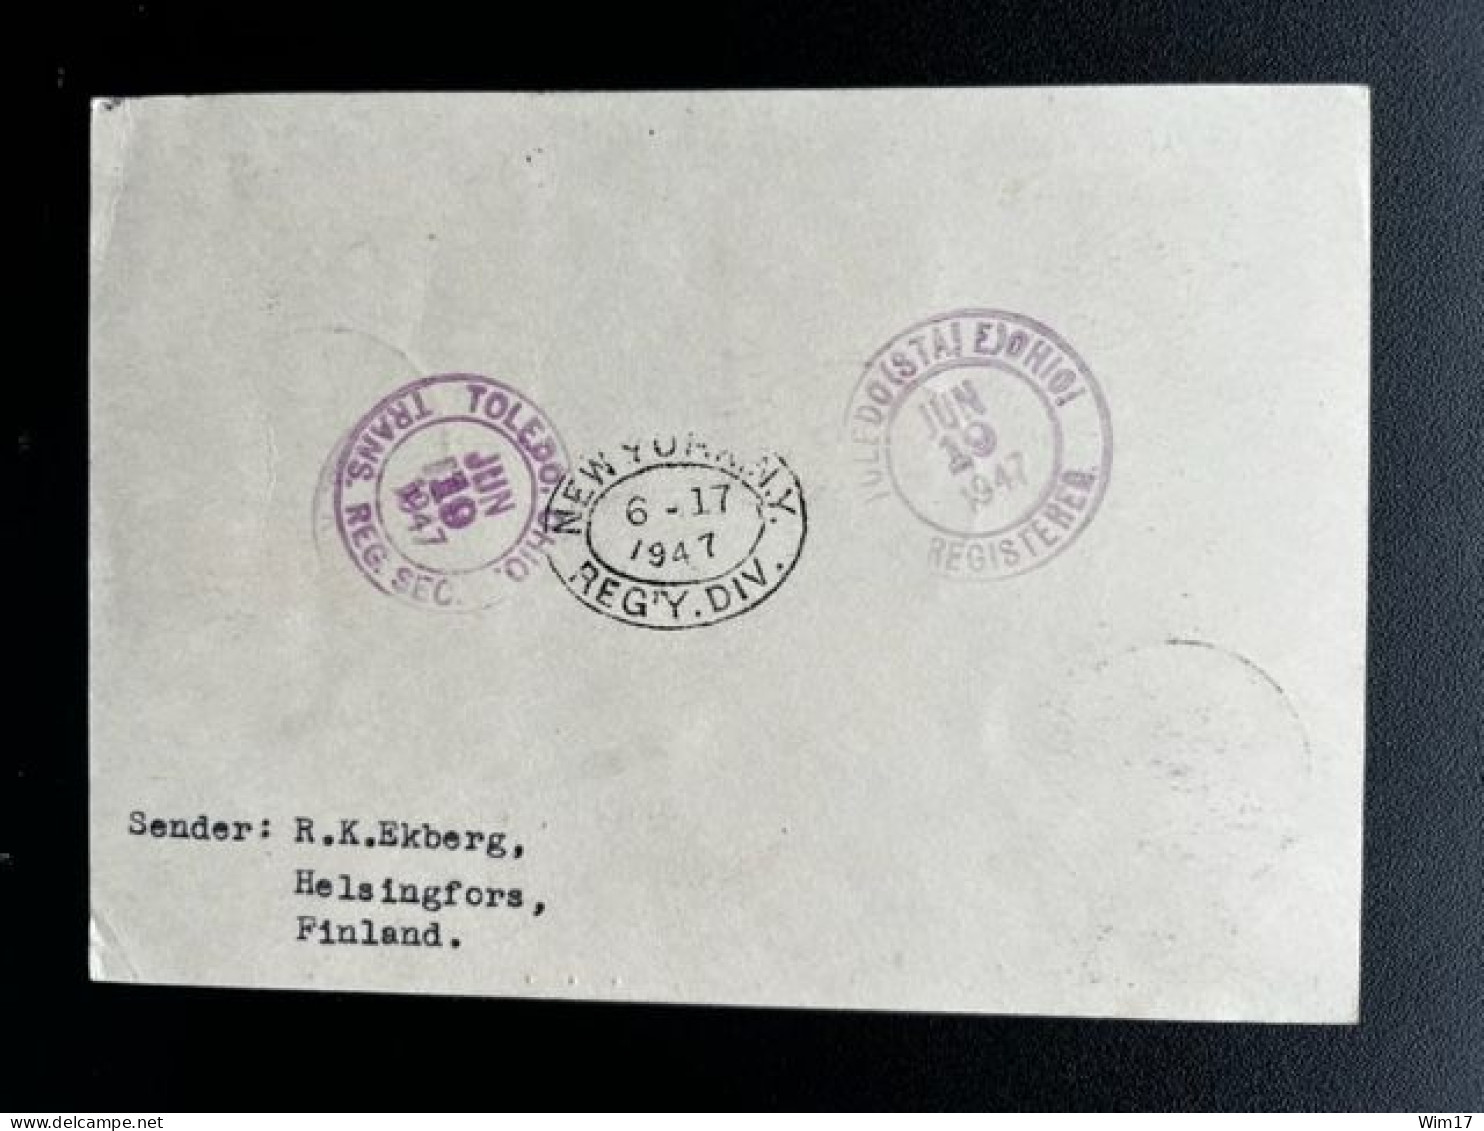 FINLAND SUOMI 1947 REGISTERED POSTCARD HELSINKI HELSINGFORS TO TOLEDO USA 02-06-1947 WITH FIRST DAY CANCEL HORSES - Lettres & Documents